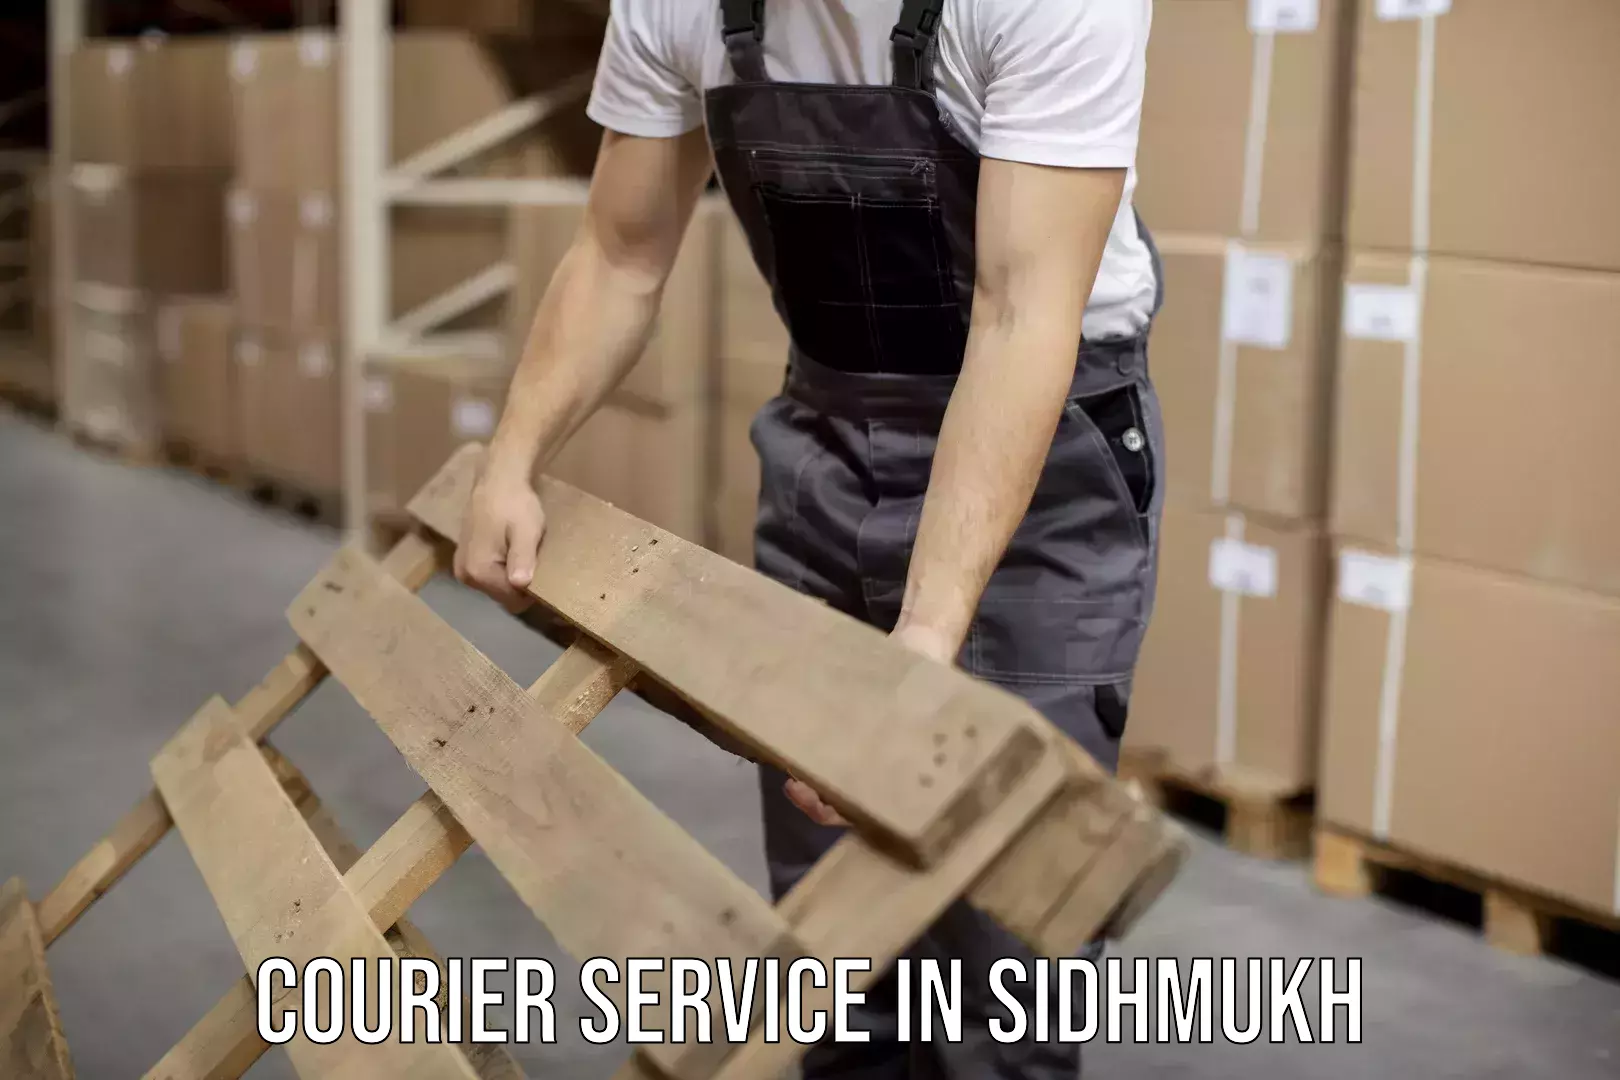 Courier service innovation in Sidhmukh